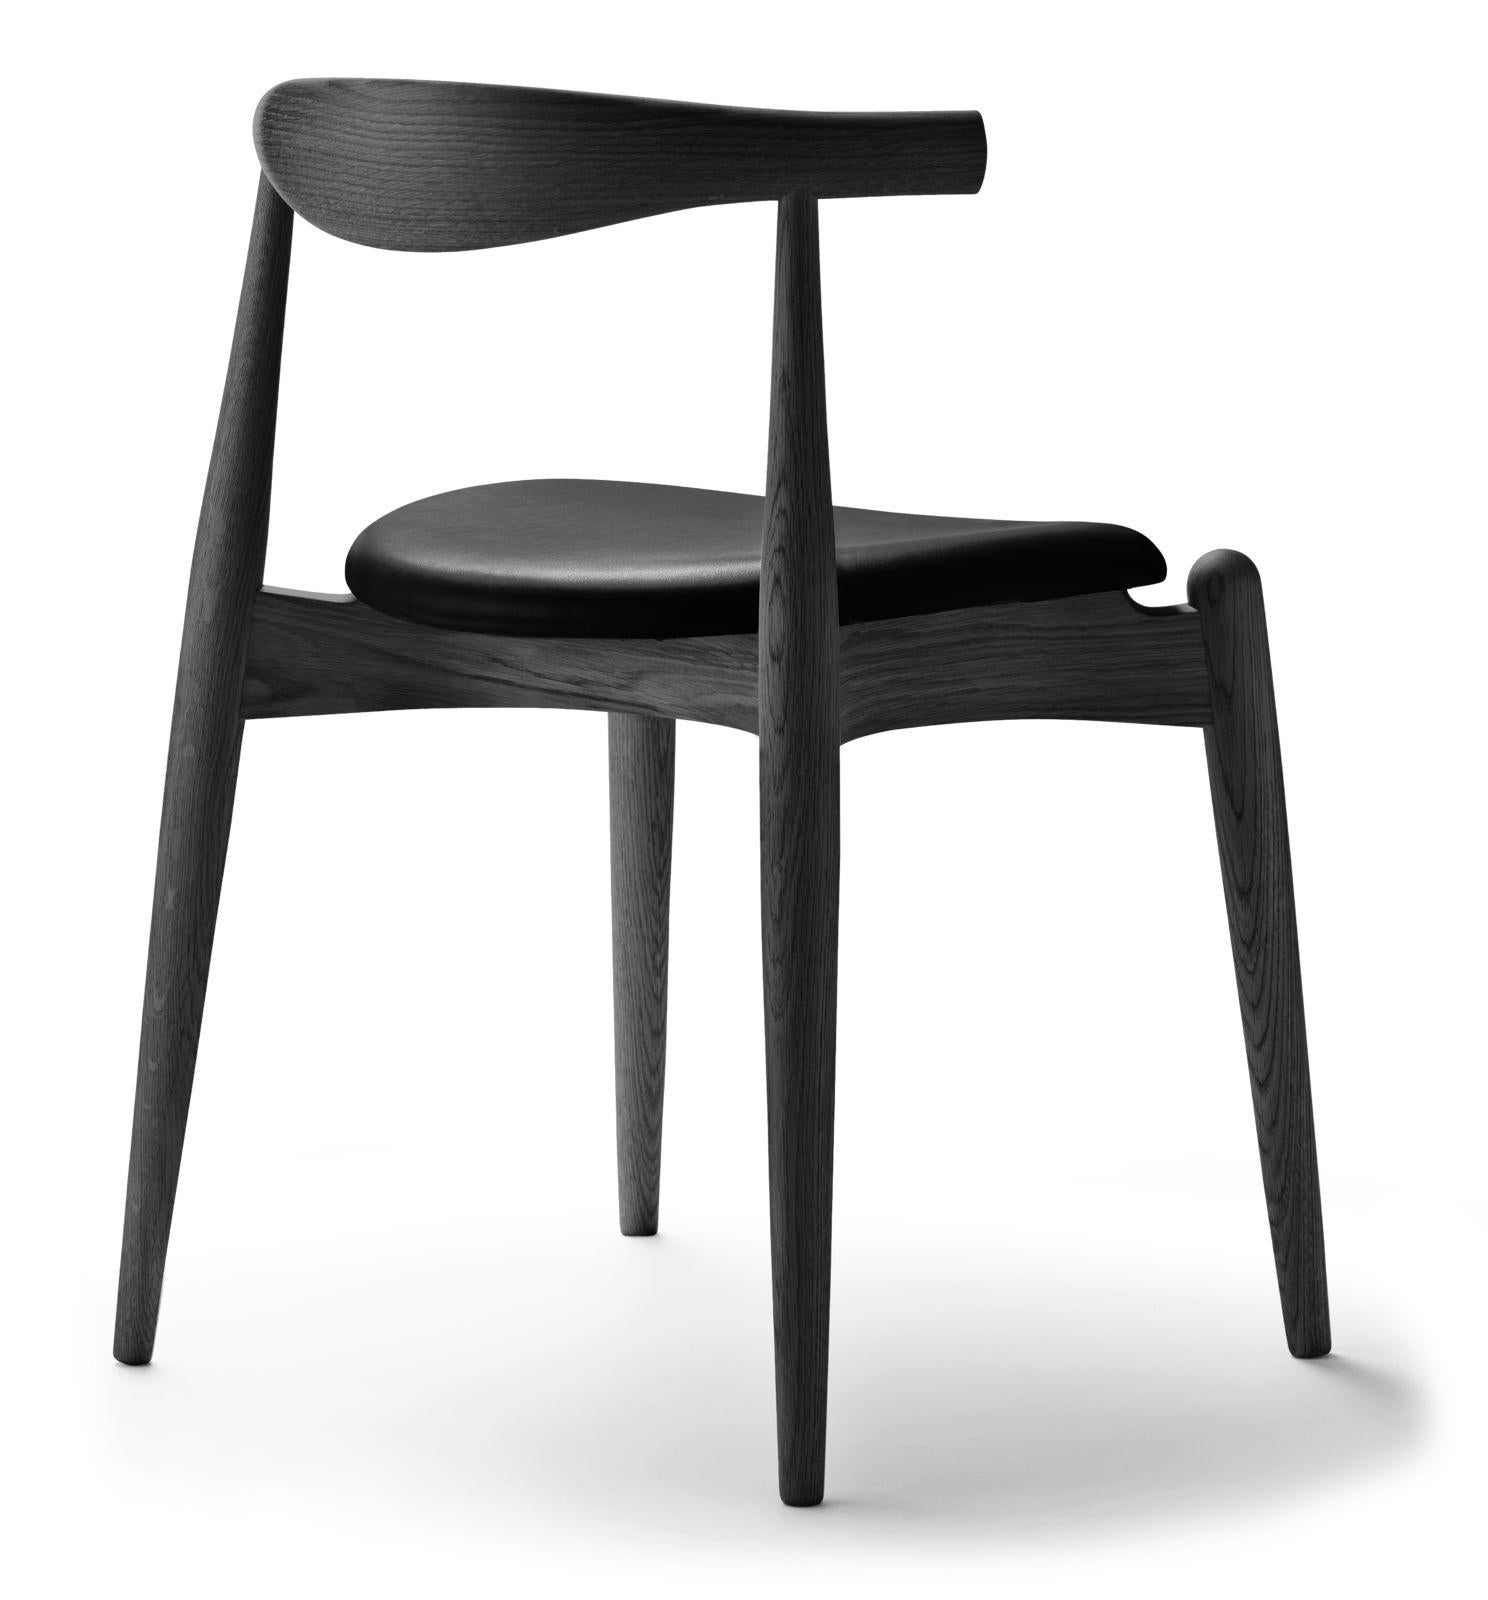 Mid-Century Modern CH20 Elbow Chair in Oak Black Finish with Loke 7150 Black Leather Seat For Sale